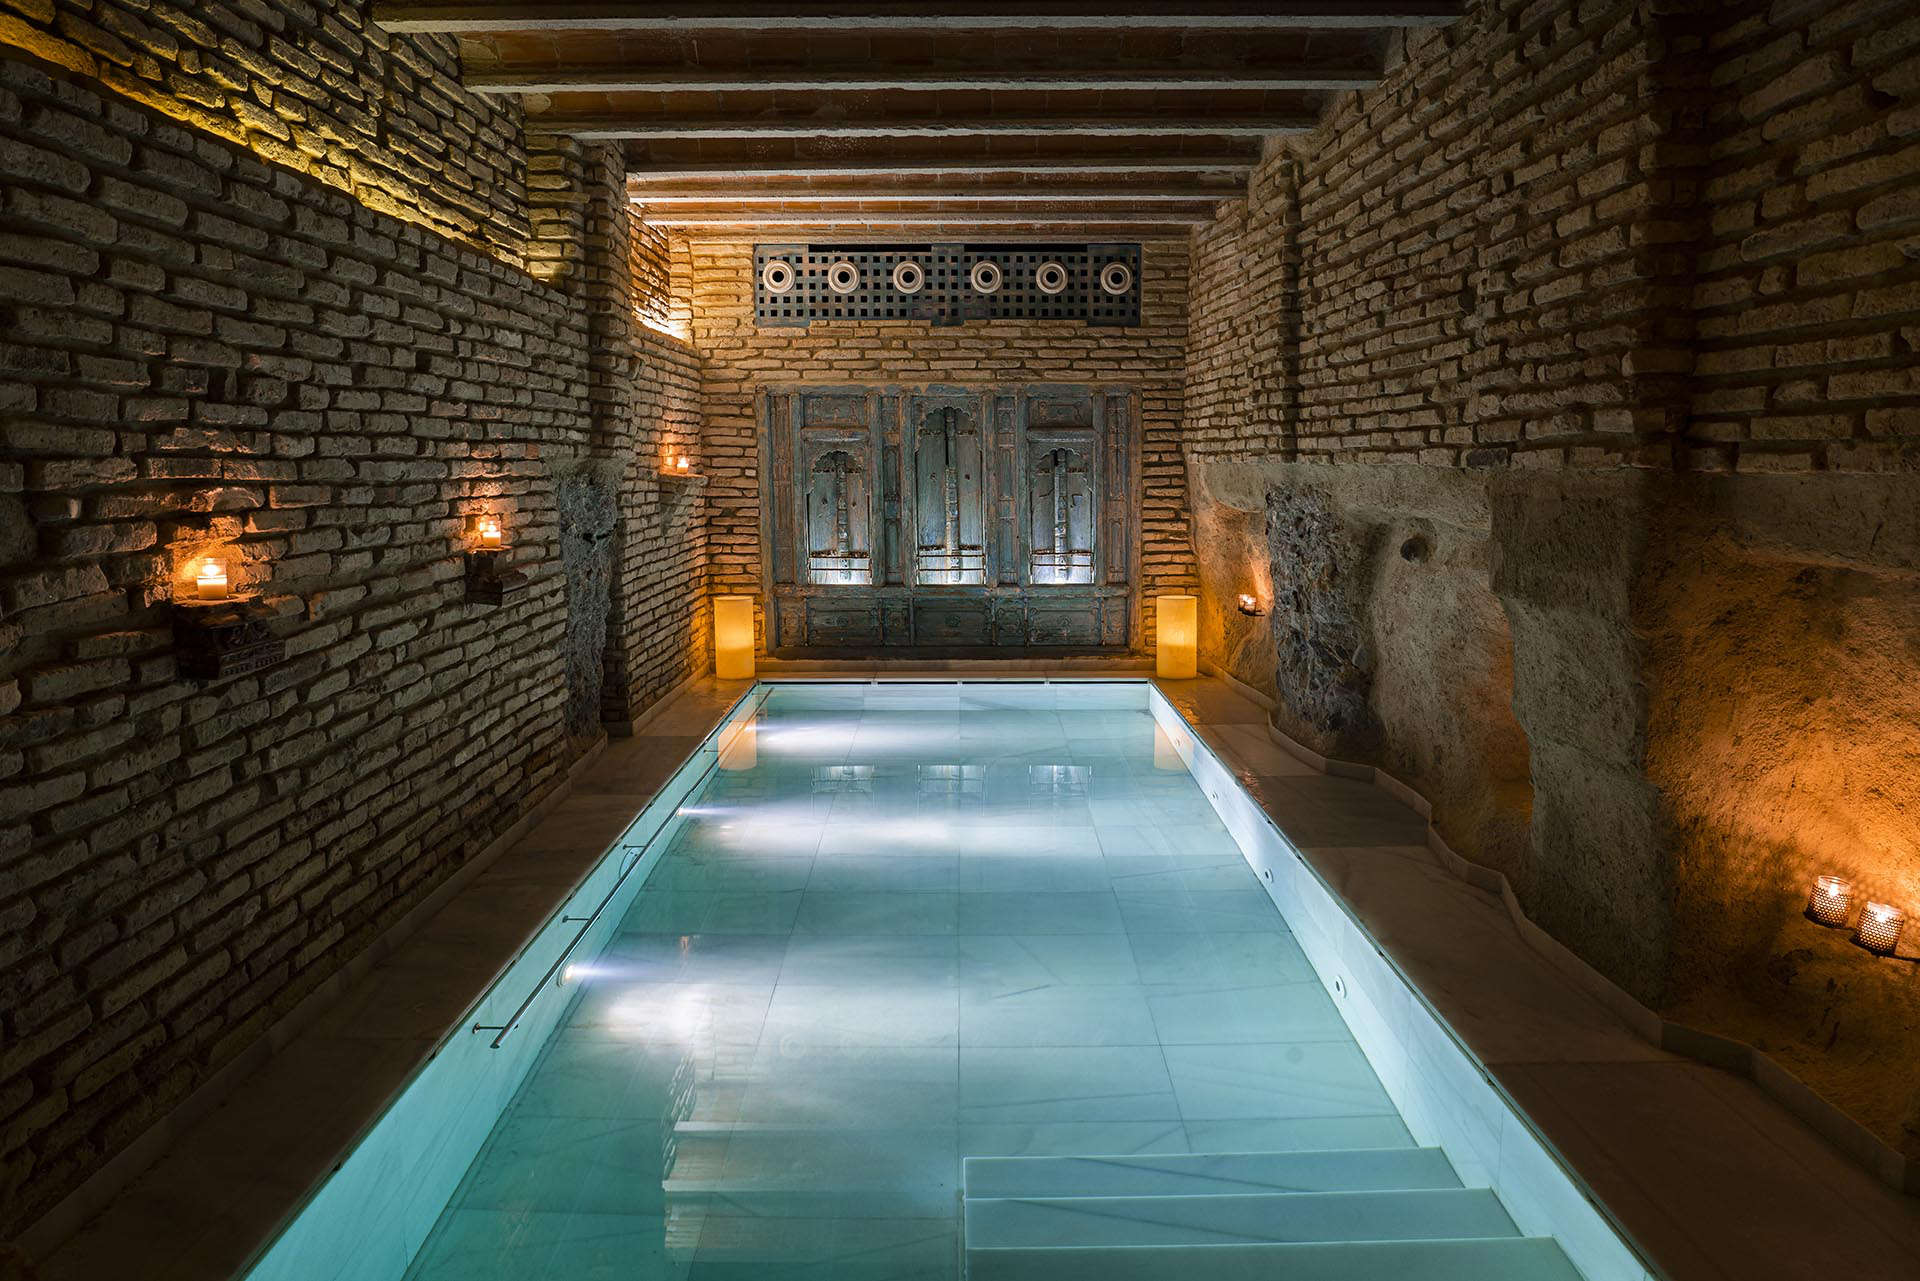 One of the spa baths at the underground spa in Almeria, showing it's blue waters